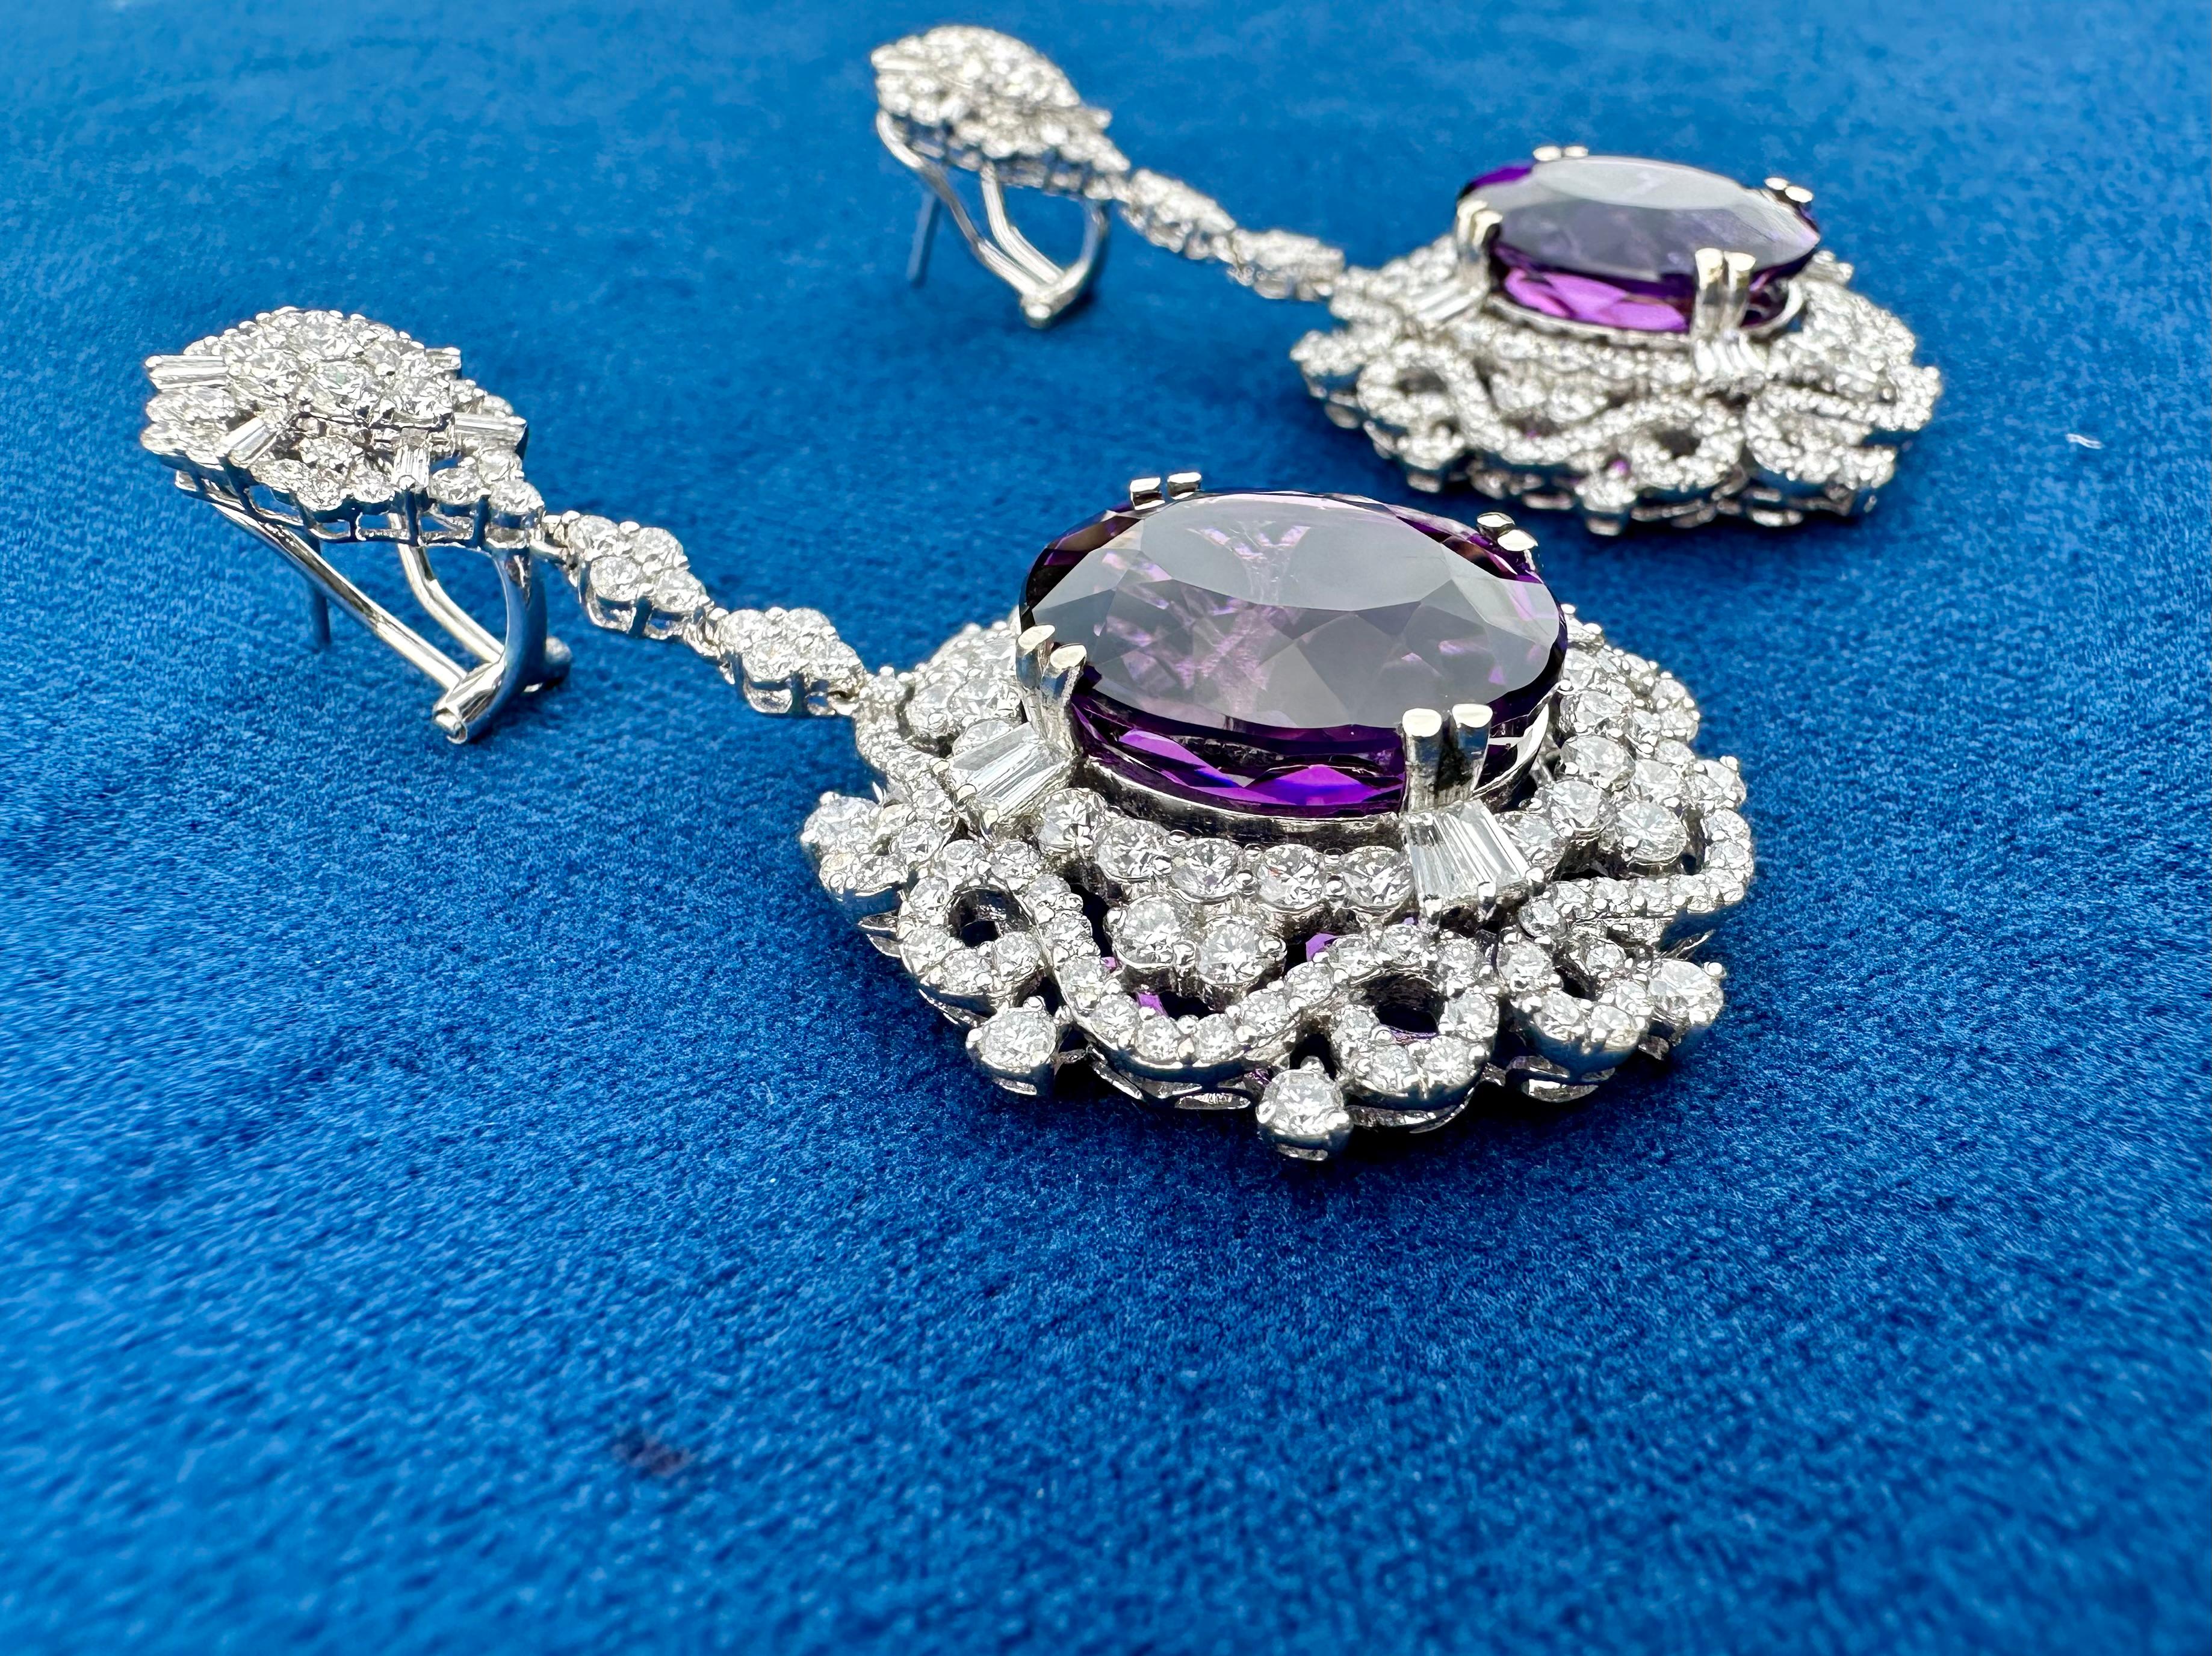 Exquisite Pair of 42.49 Carat Amethyst and Diamond 18K White Gold Earrings In Excellent Condition For Sale In Tustin, CA